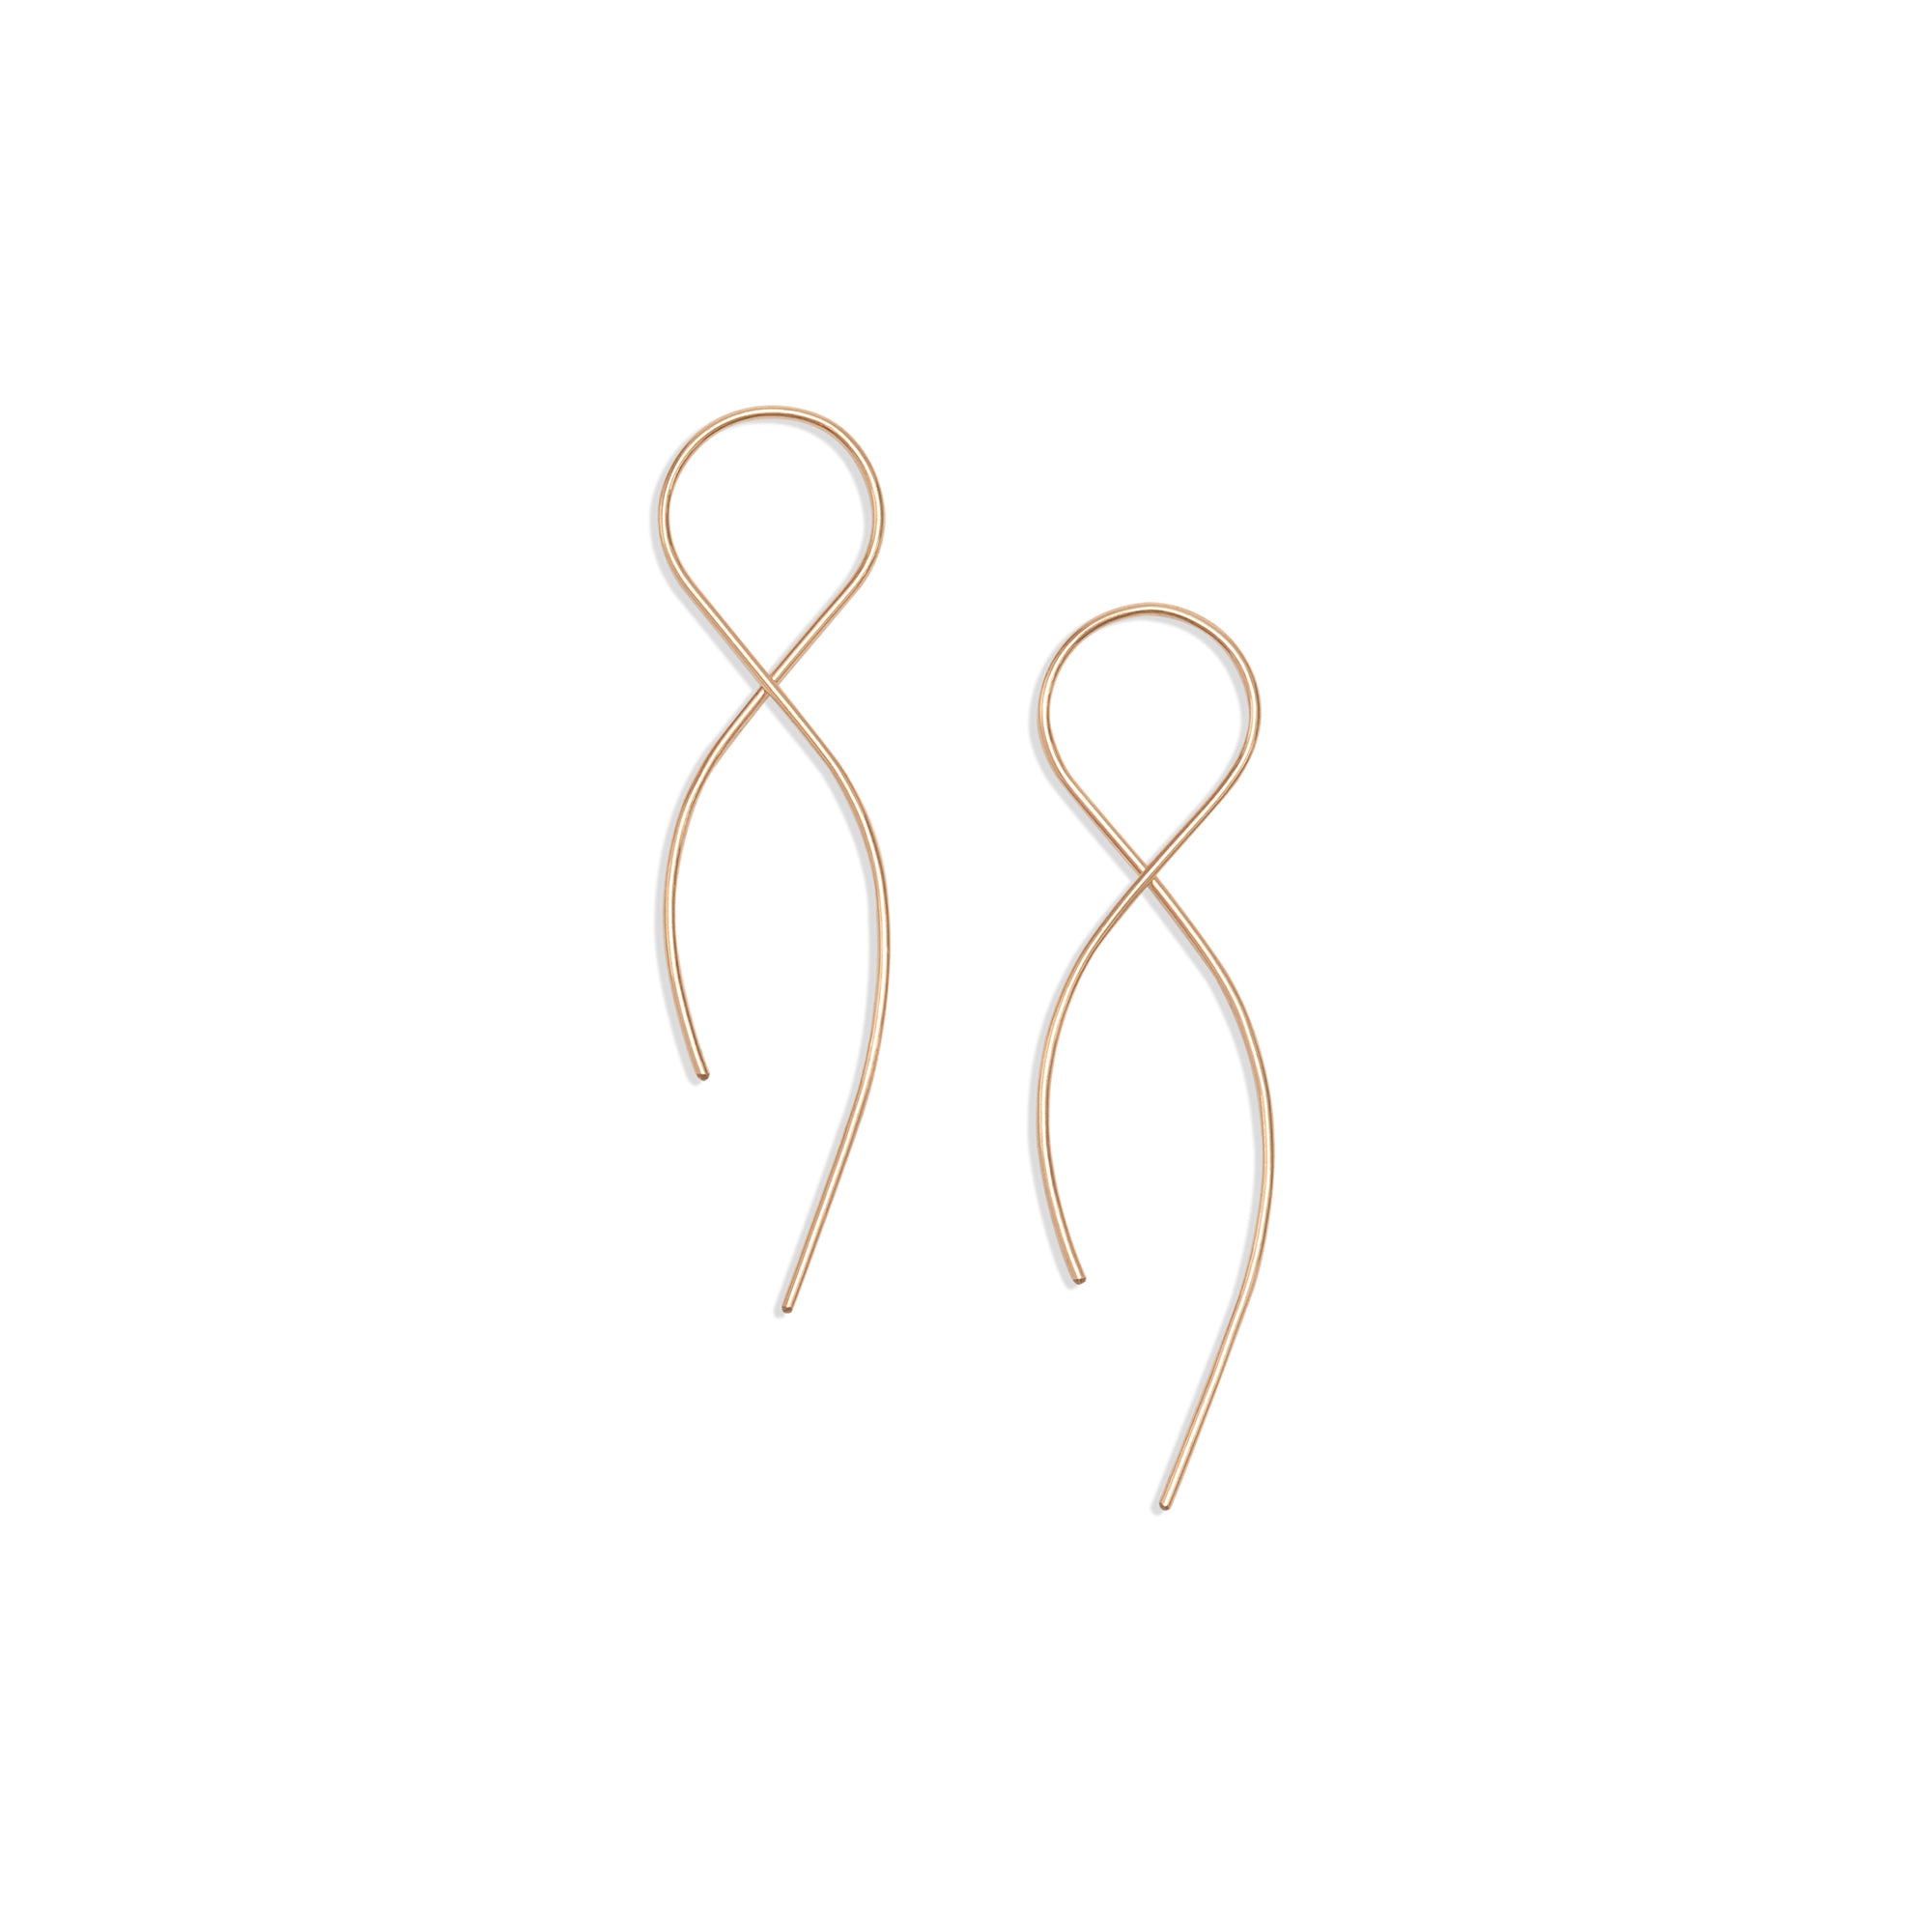 Lightweight and elegant, our signature Infinity Earrings are a perfect alternative to the traditional hoop